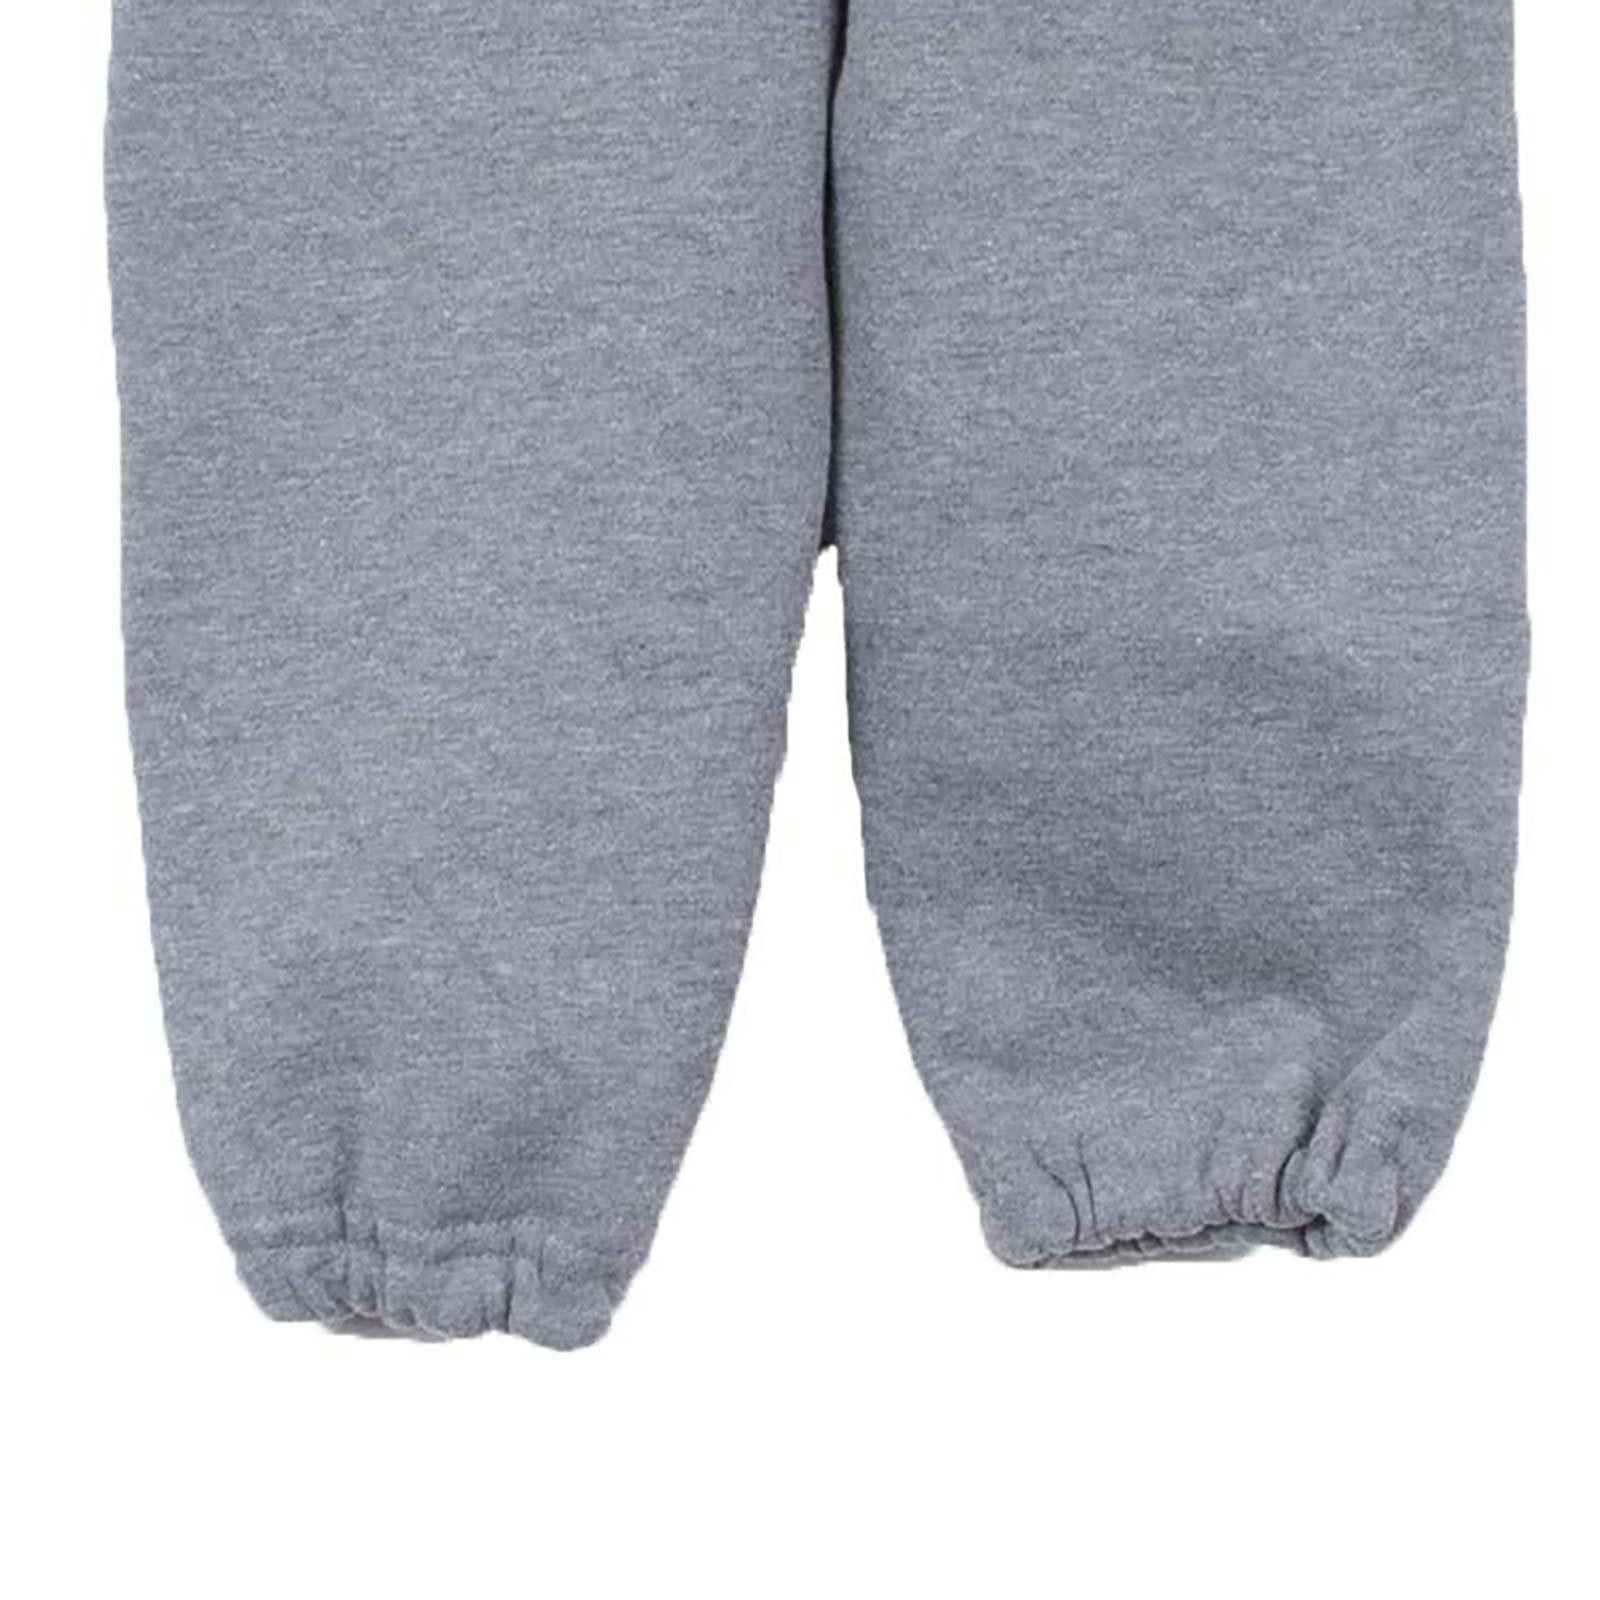 USC Arch Toddler TT Pant Oxford image71